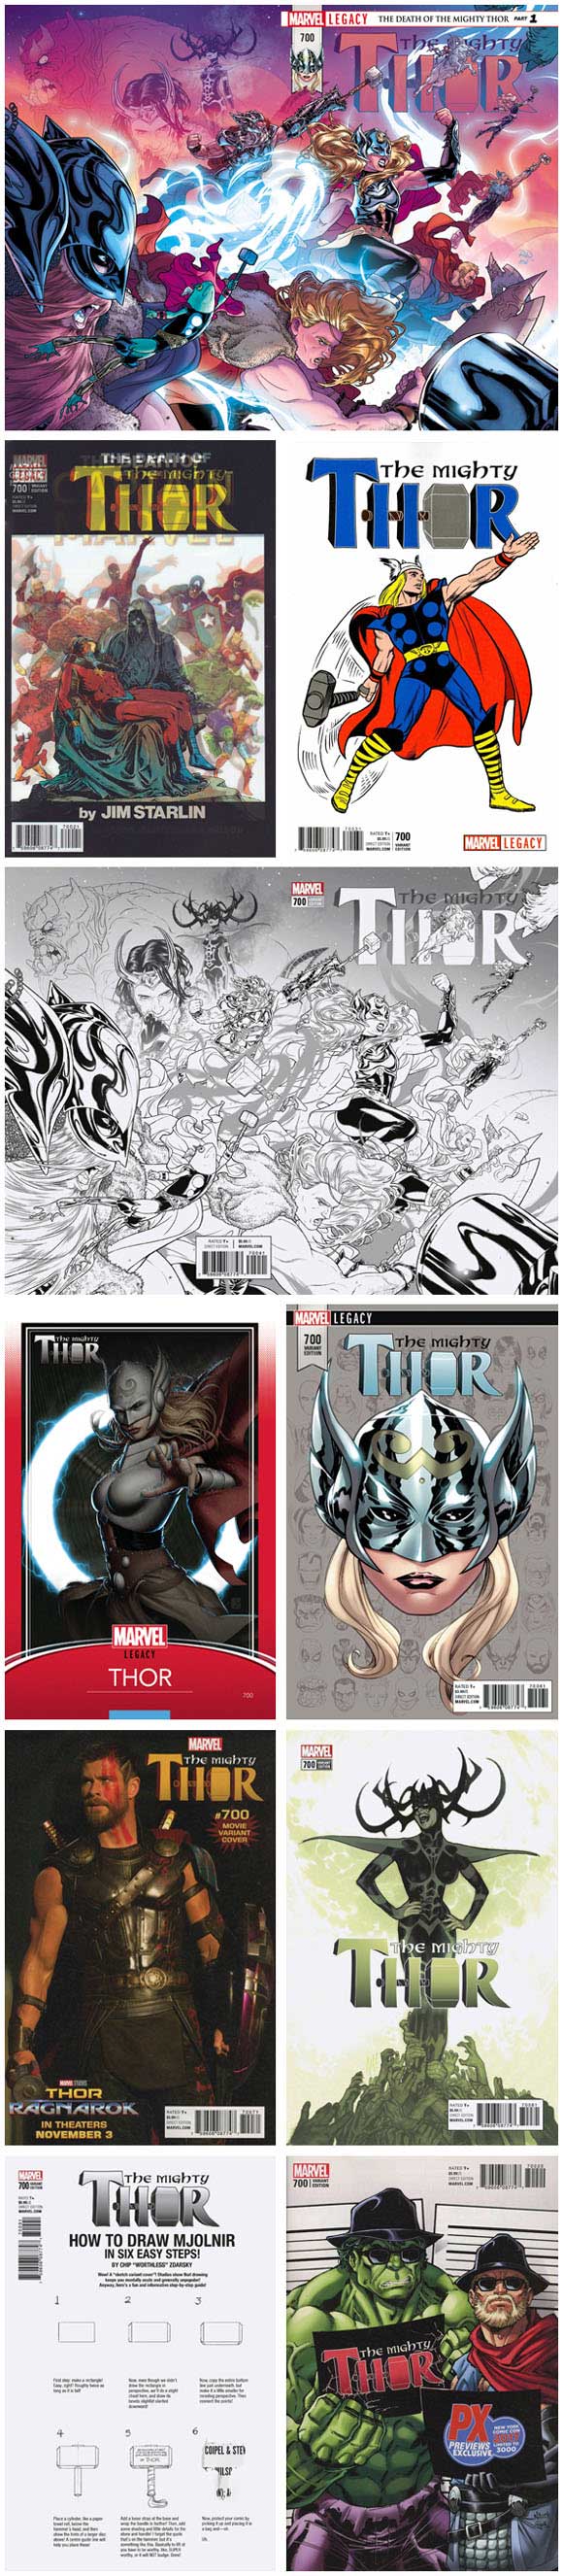 The Mighty Thor #700 covers